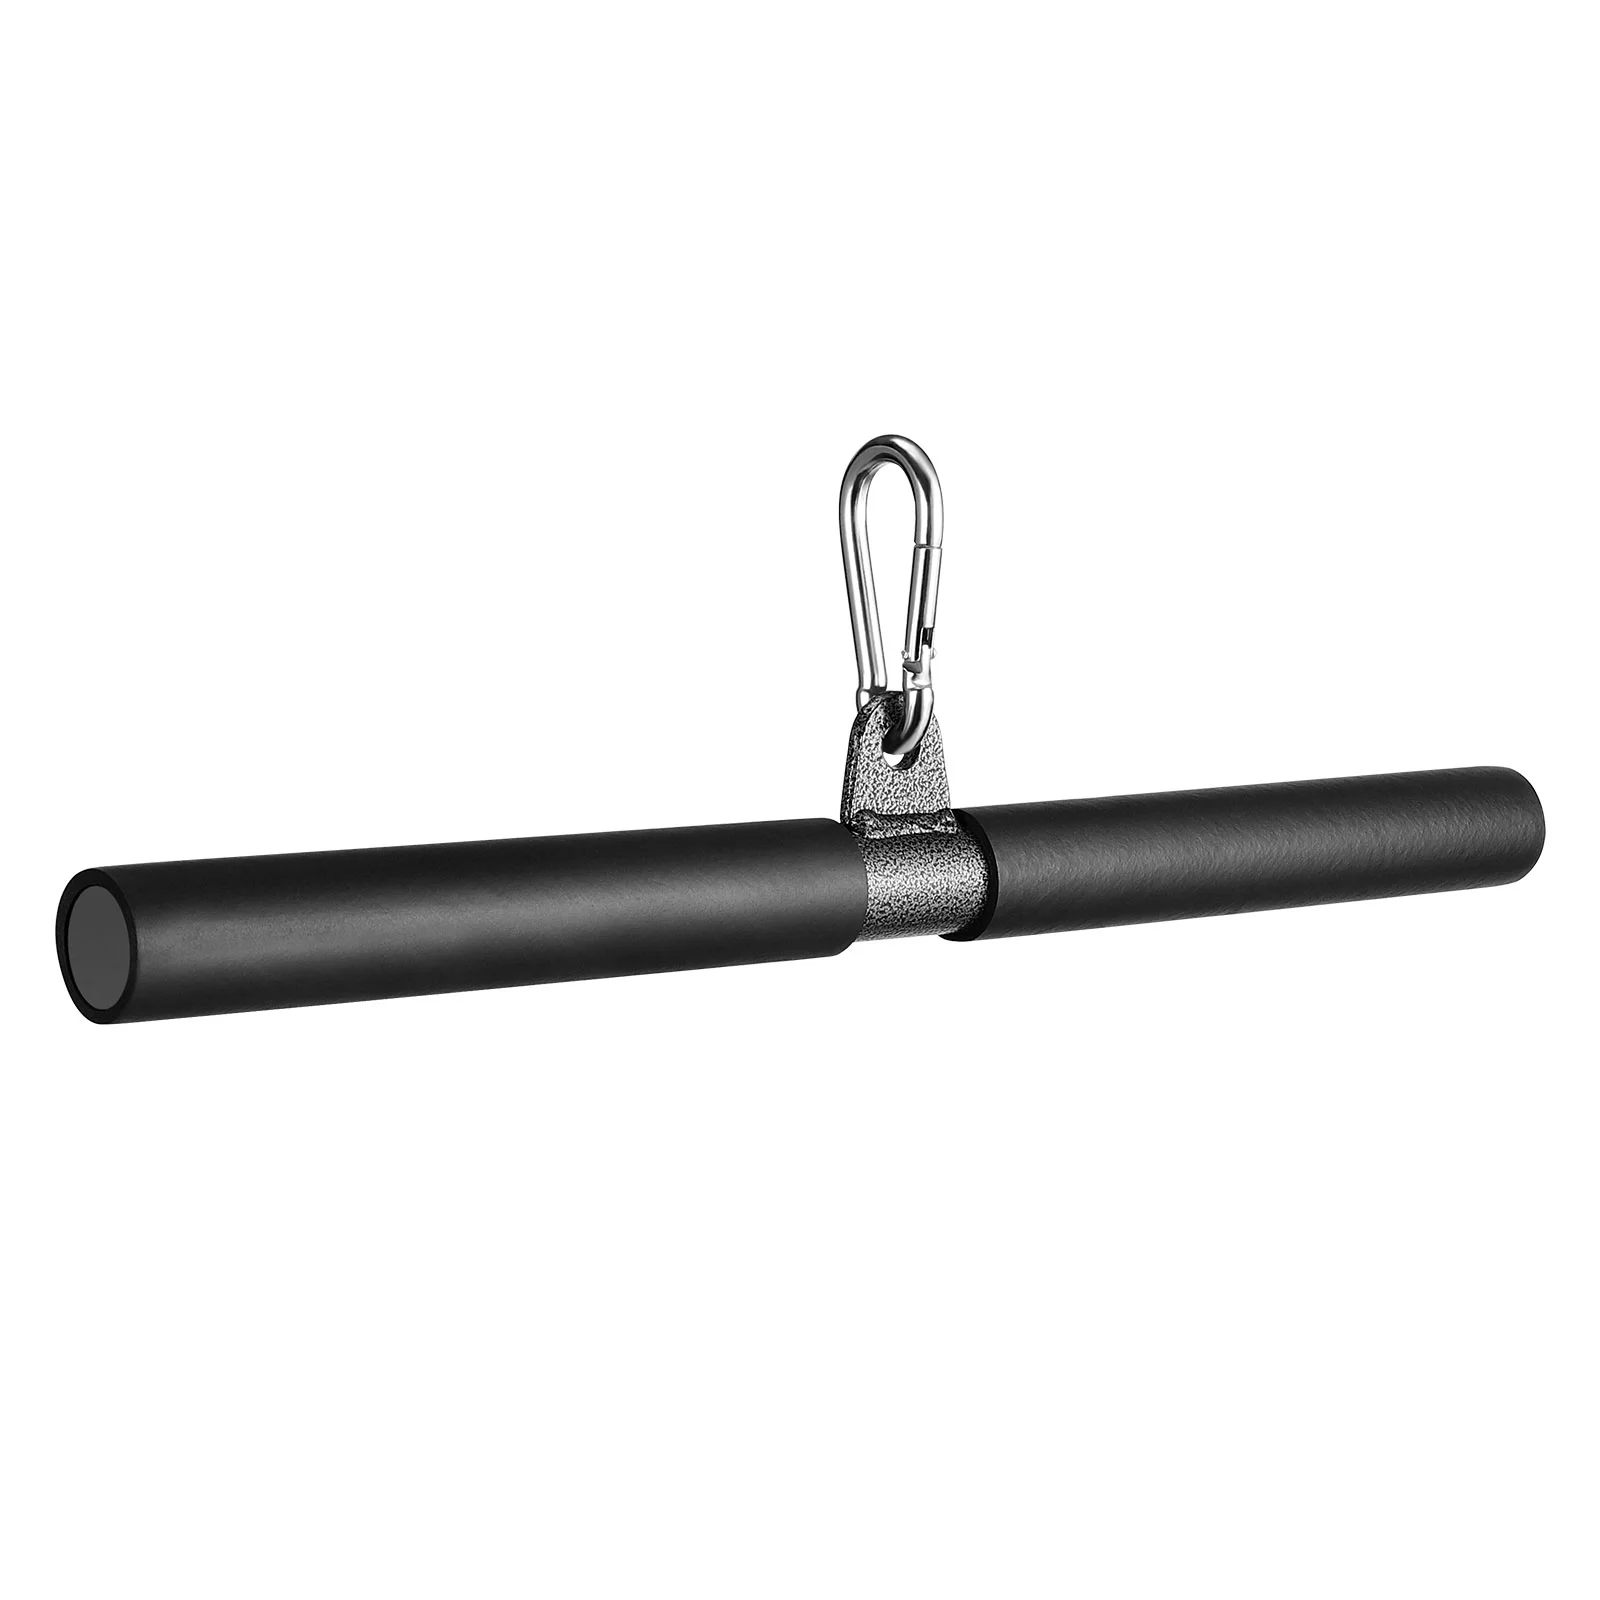 

Straight Lat Bar Cable Attachment, LAT Down Bar Strength Training Handle with Hook for Home Exercise Tools Training